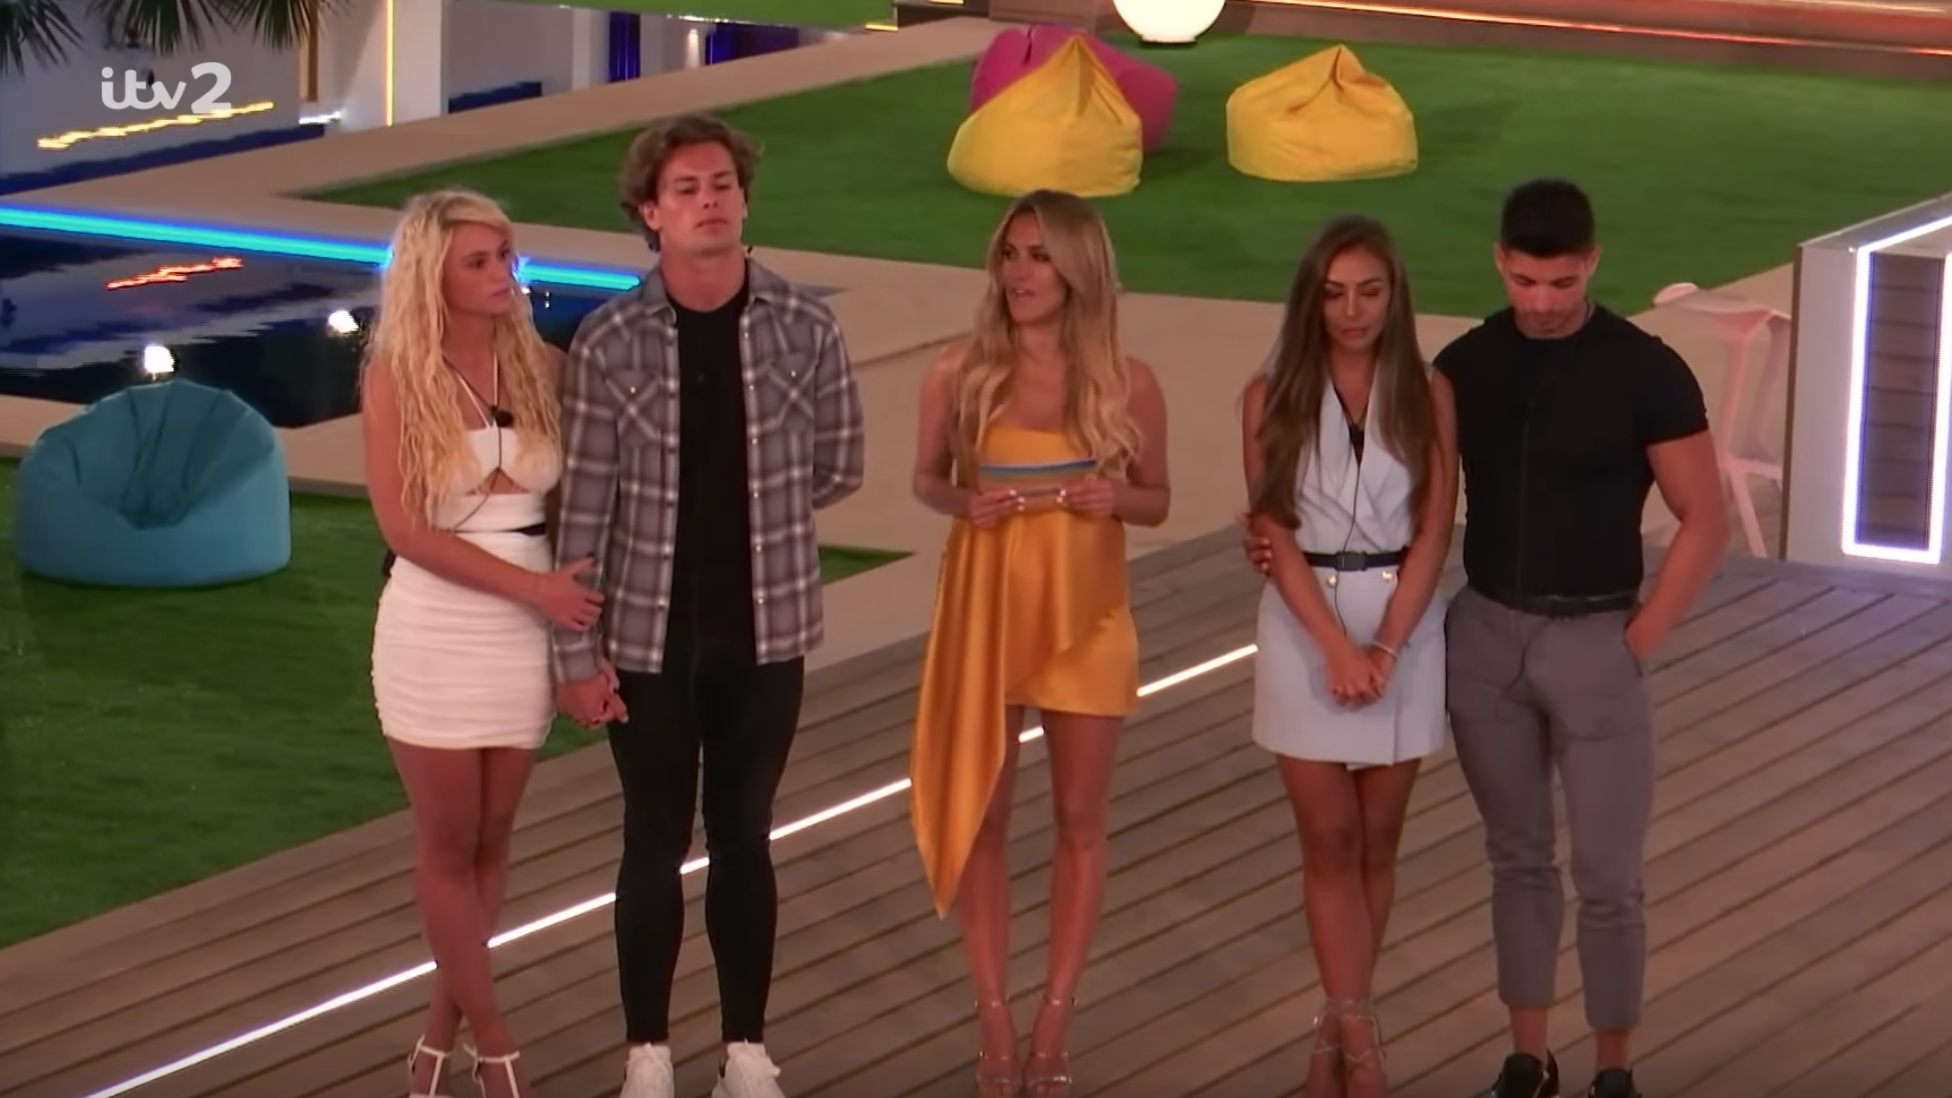 WATCH The first look at tonight's DRAMATIC episode of Love Island